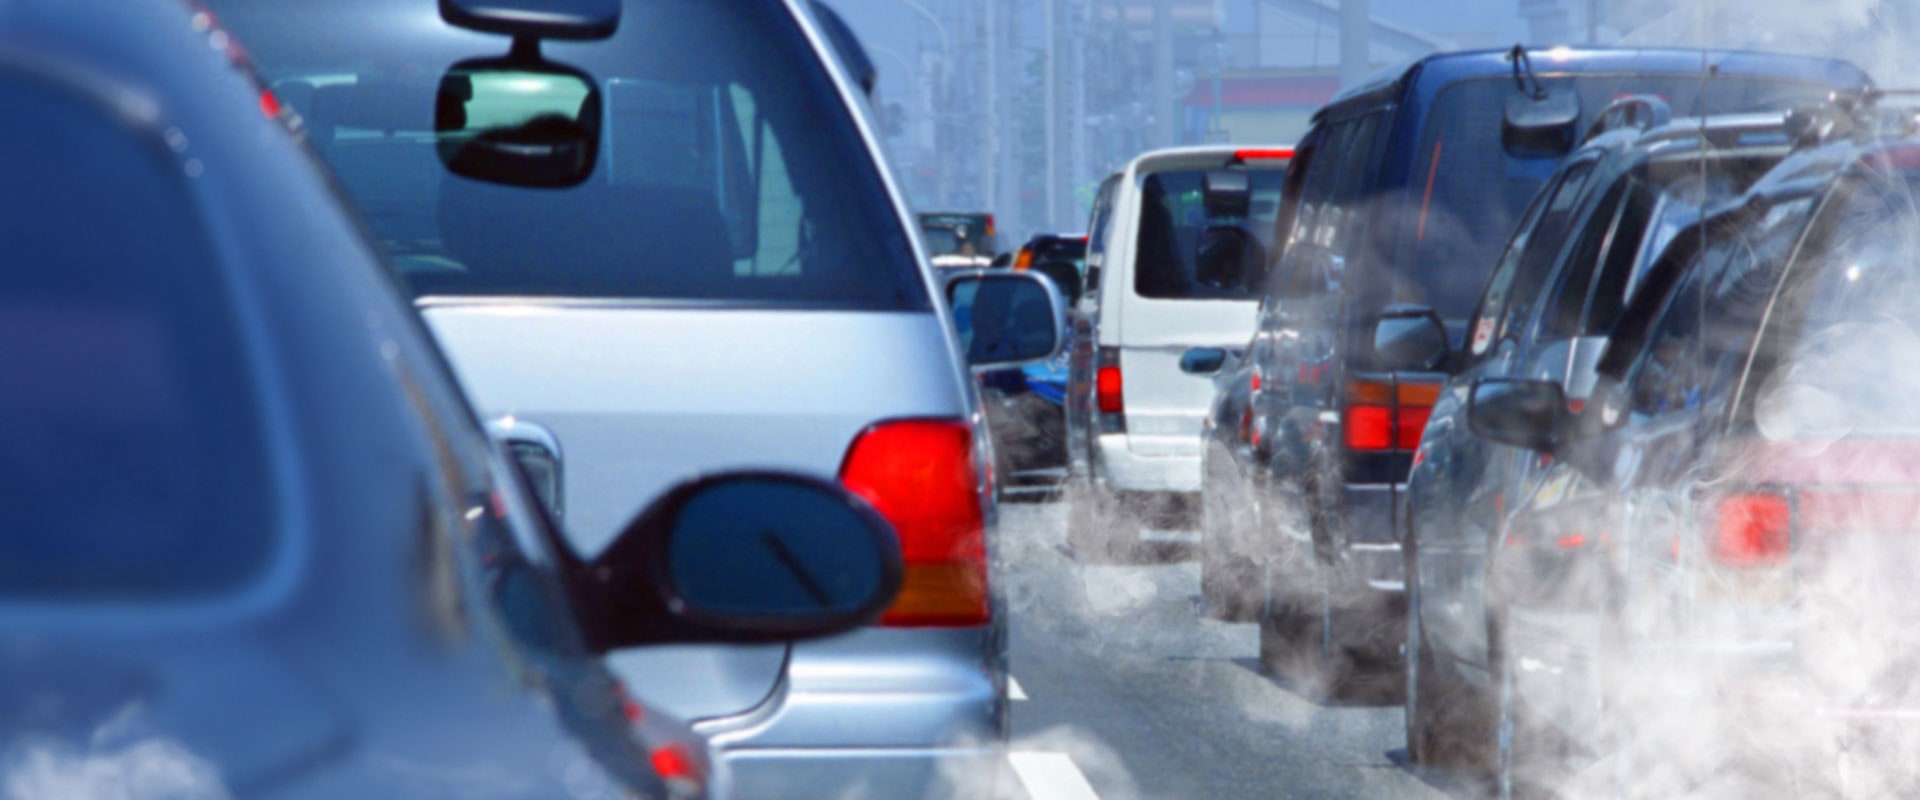 What effect does transportation have on the environment?